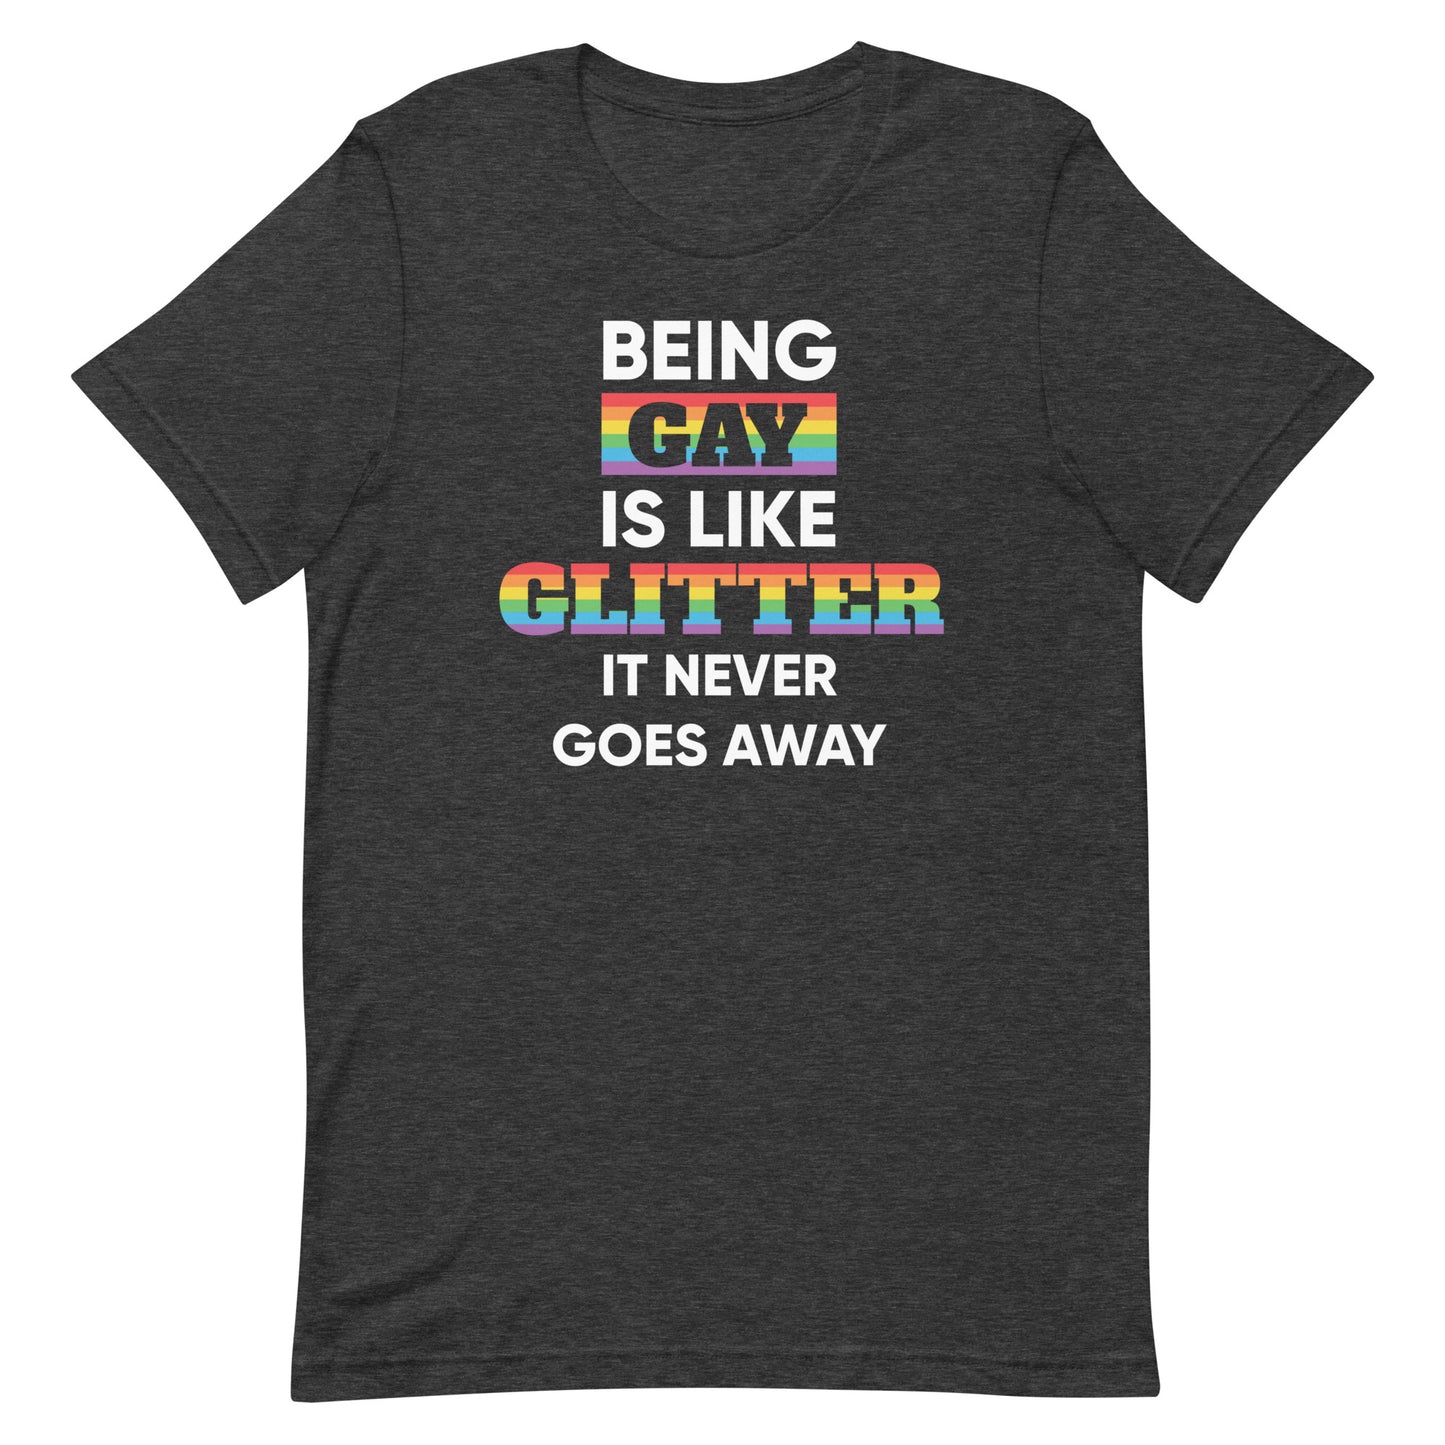 Being Gay is Like Glitter It Never Goes Away T-Shirt